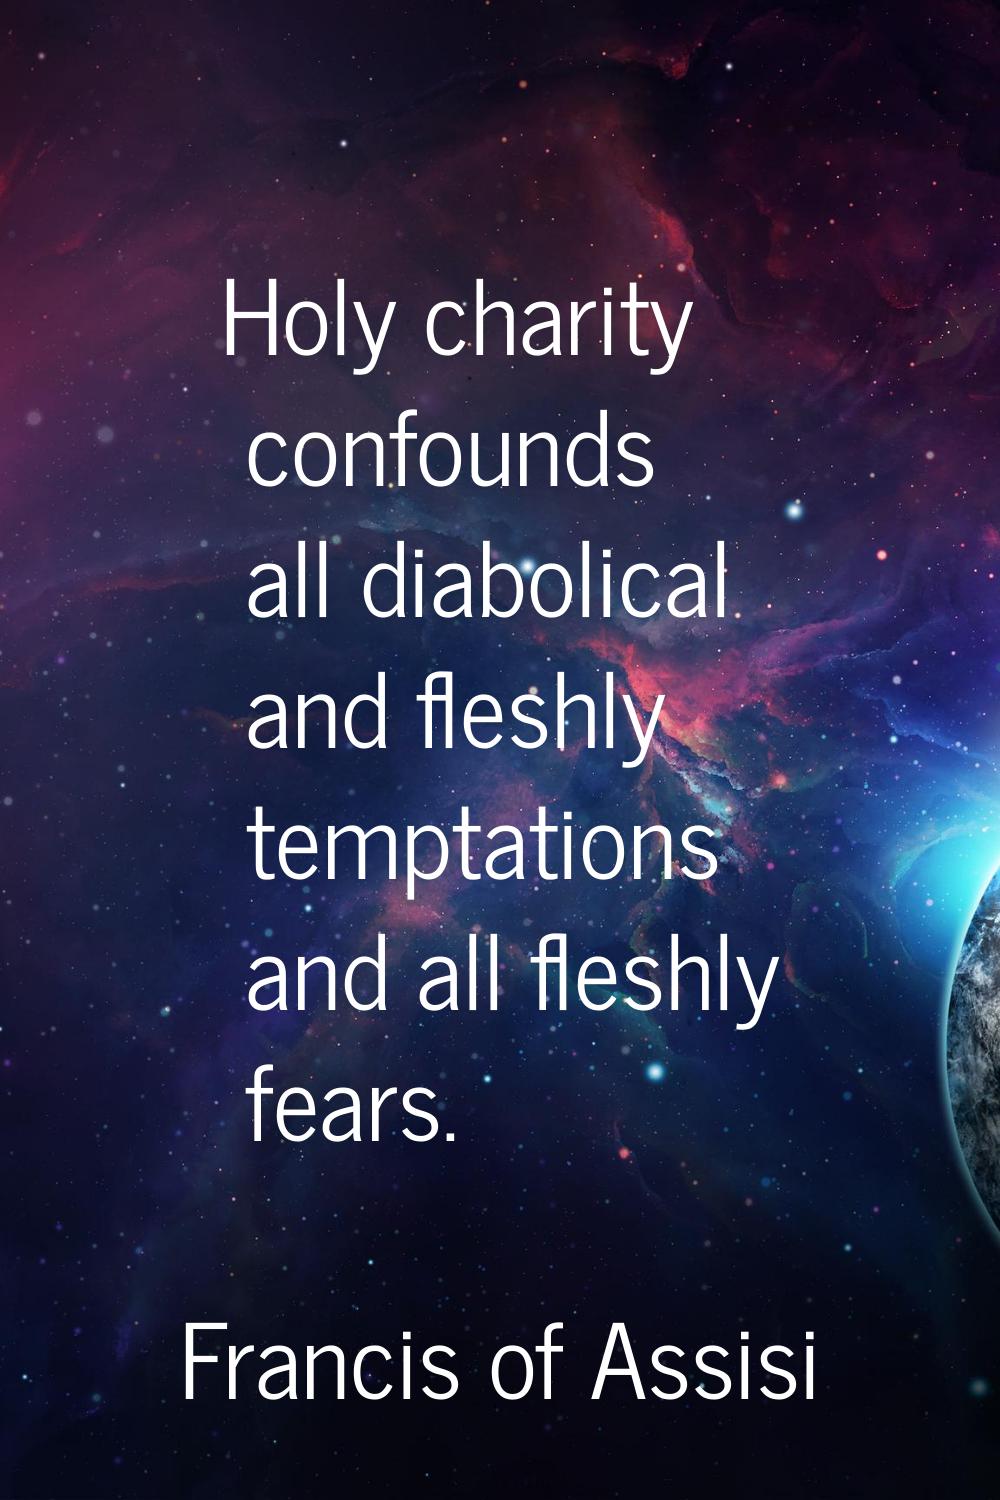 Holy charity confounds all diabolical and fleshly temptations and all fleshly fears.